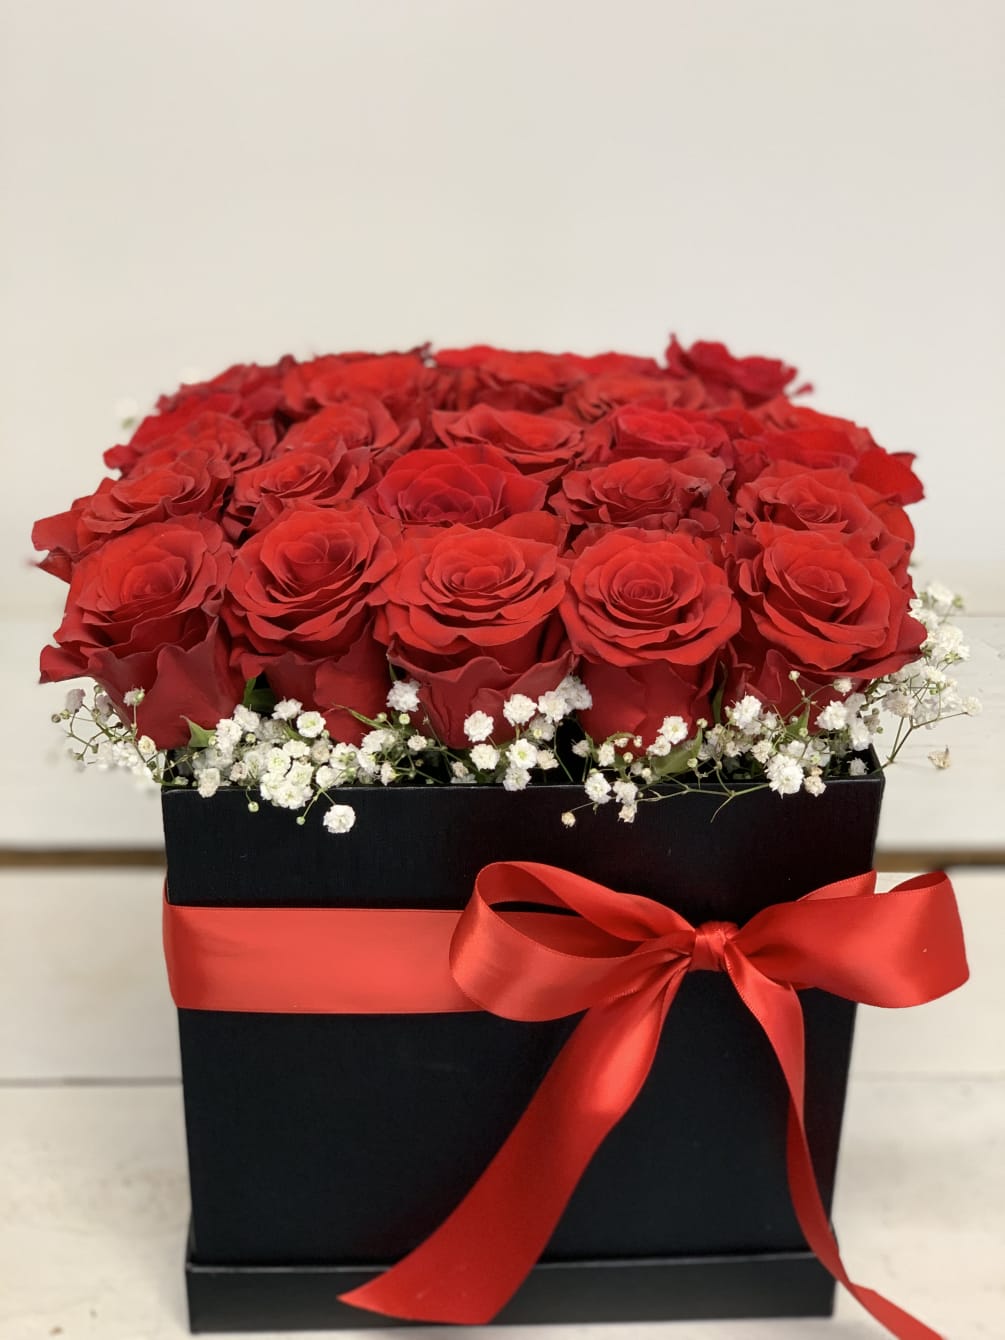 Send love a big box of 25 red roses also available in